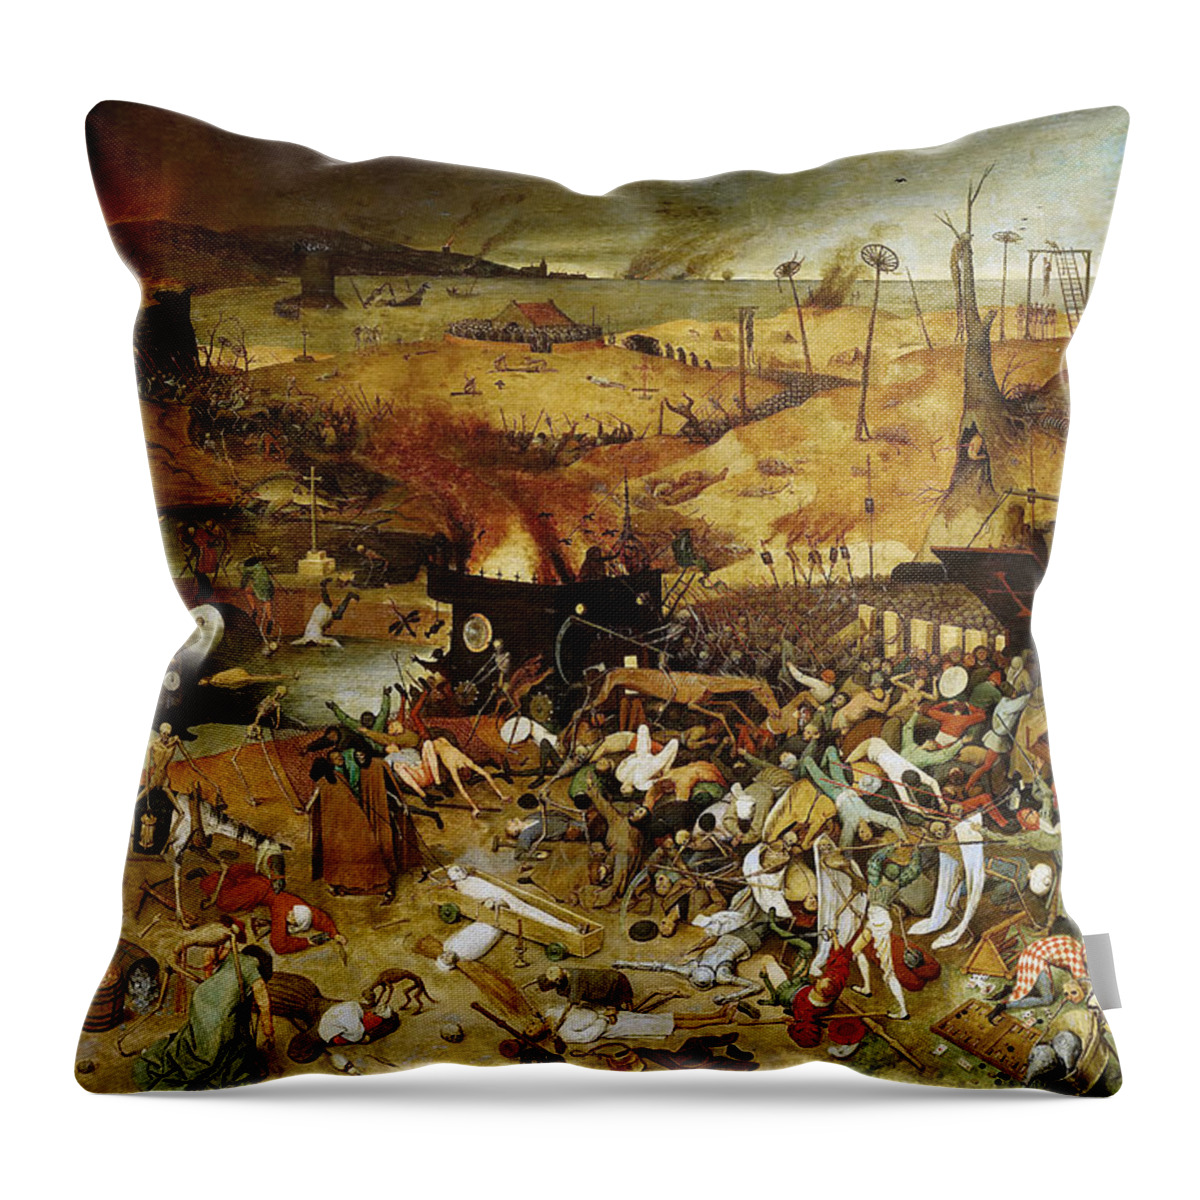 Netherlandish Painters Throw Pillow featuring the painting The Triumph of Death, circa 1562 by Pieter Bruegel the Elder